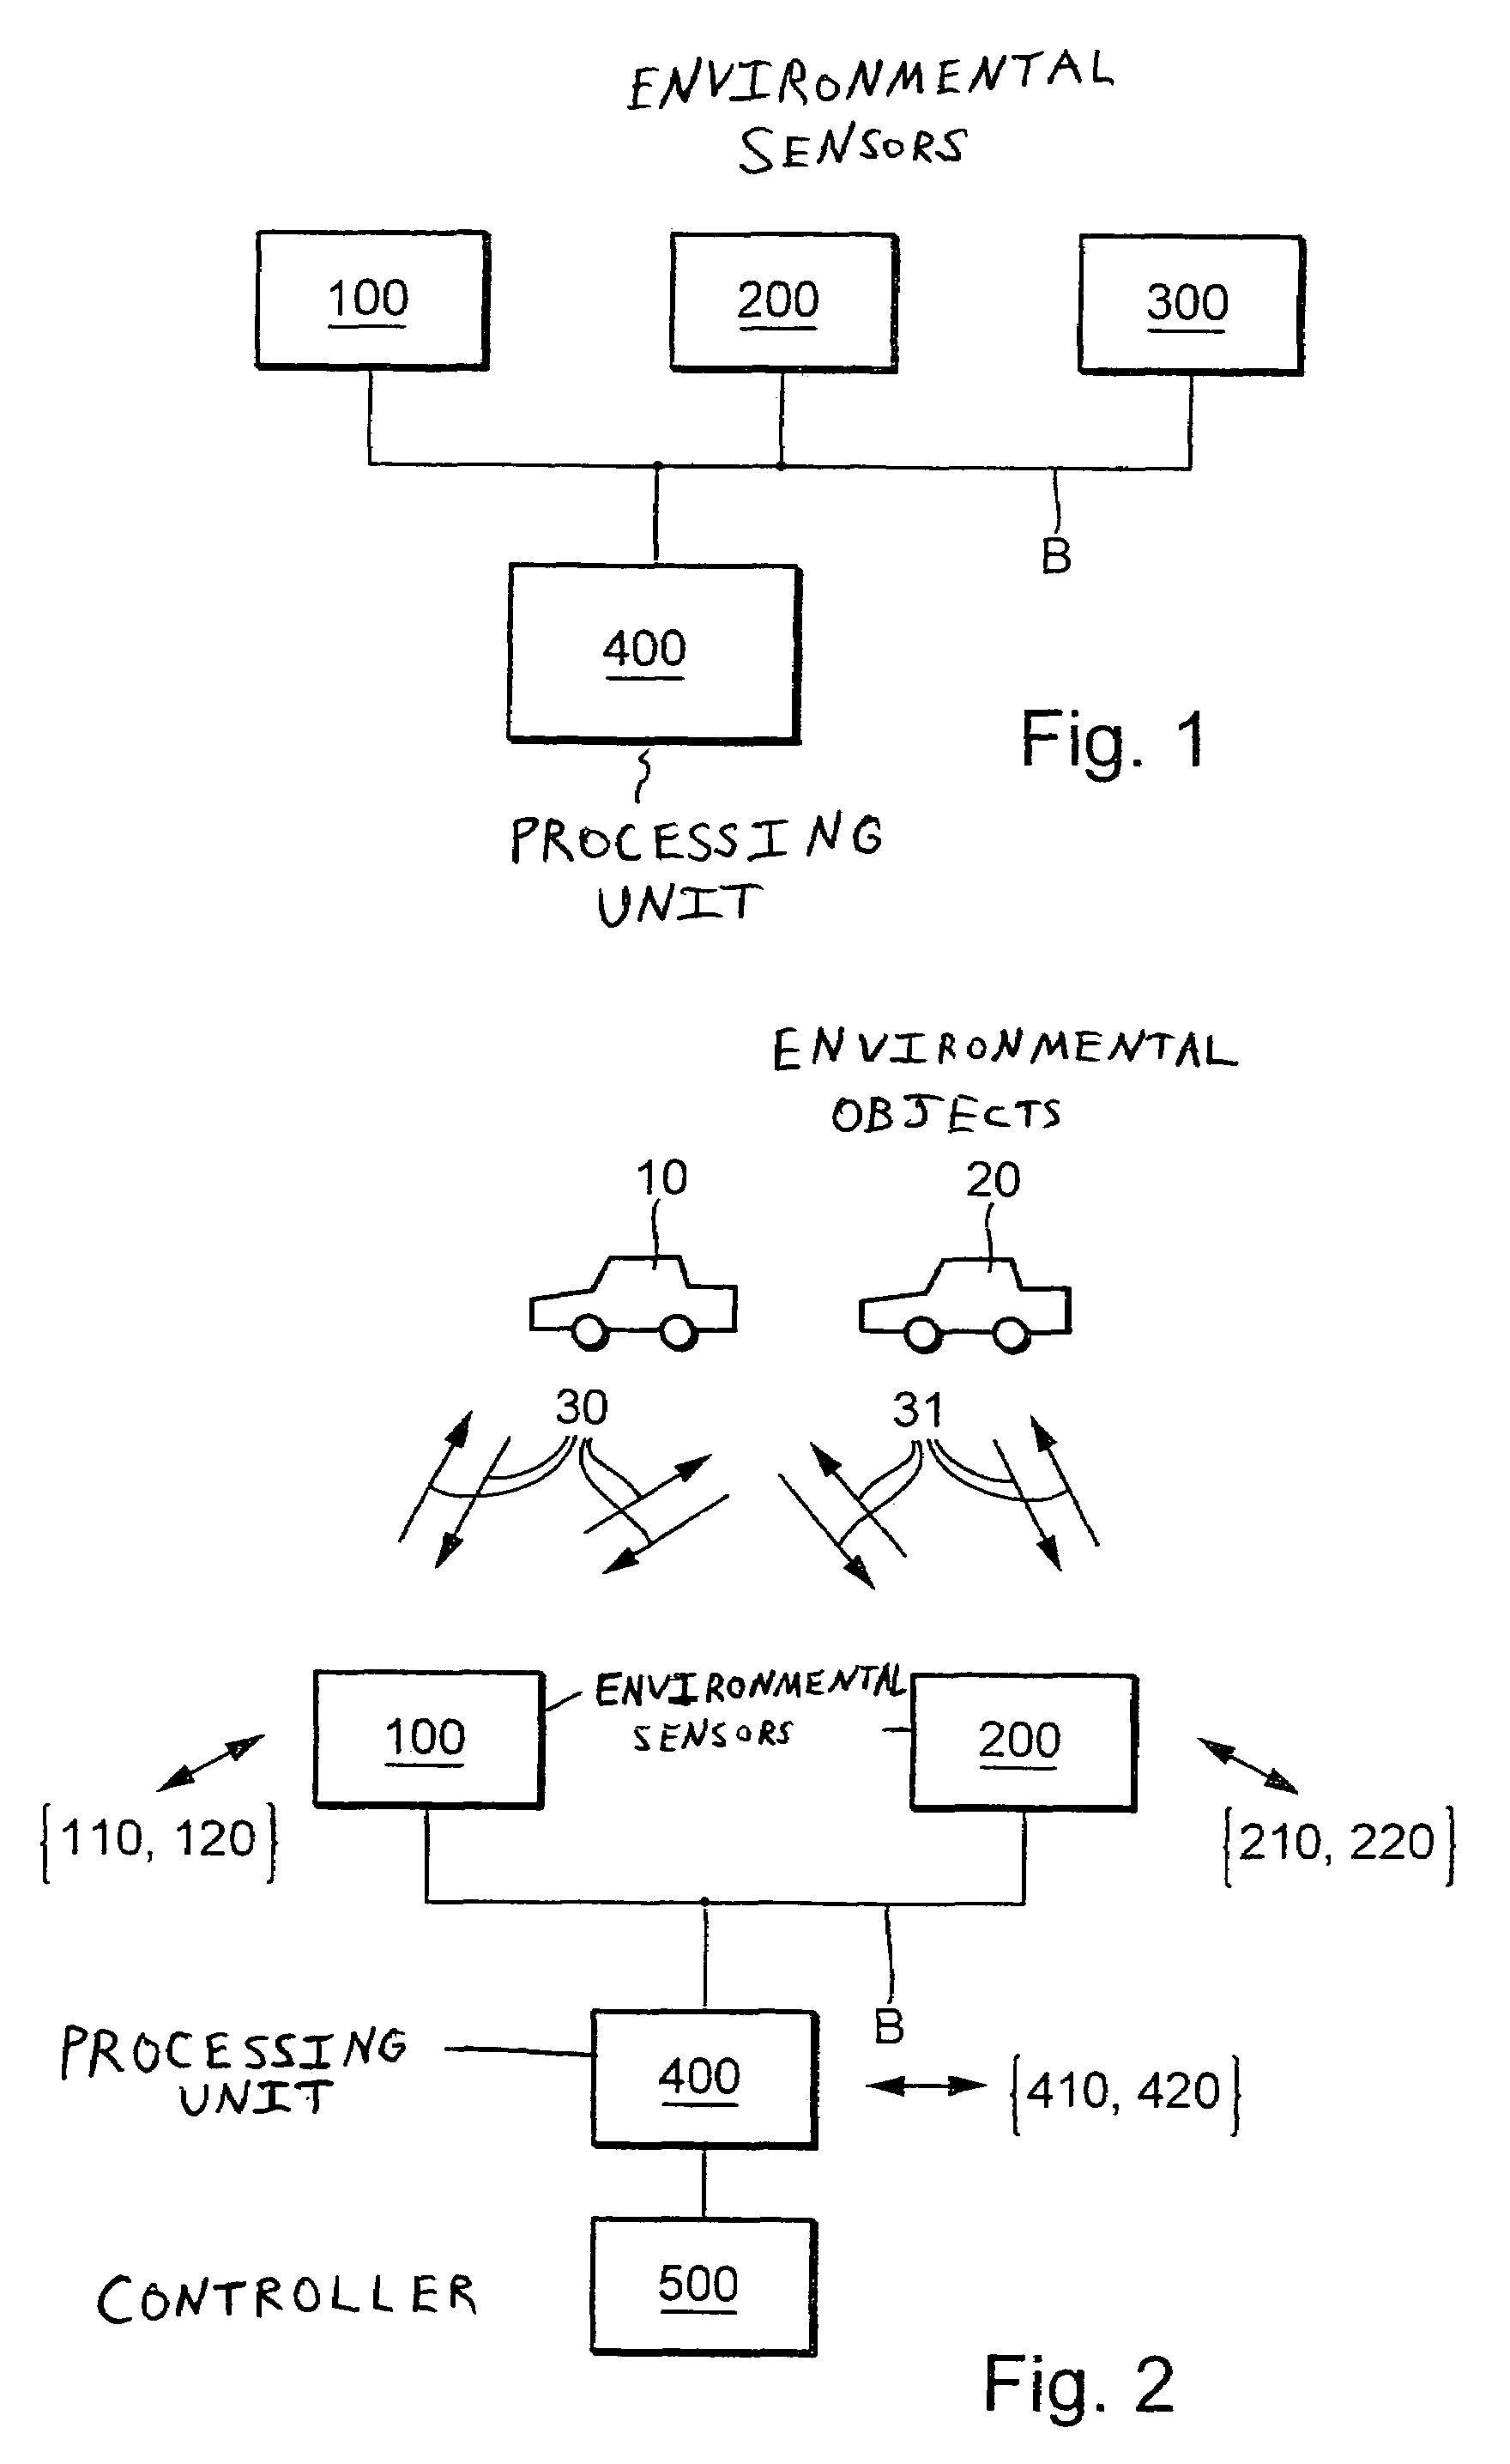 Method and device for the exchange and processing of data into fusion data